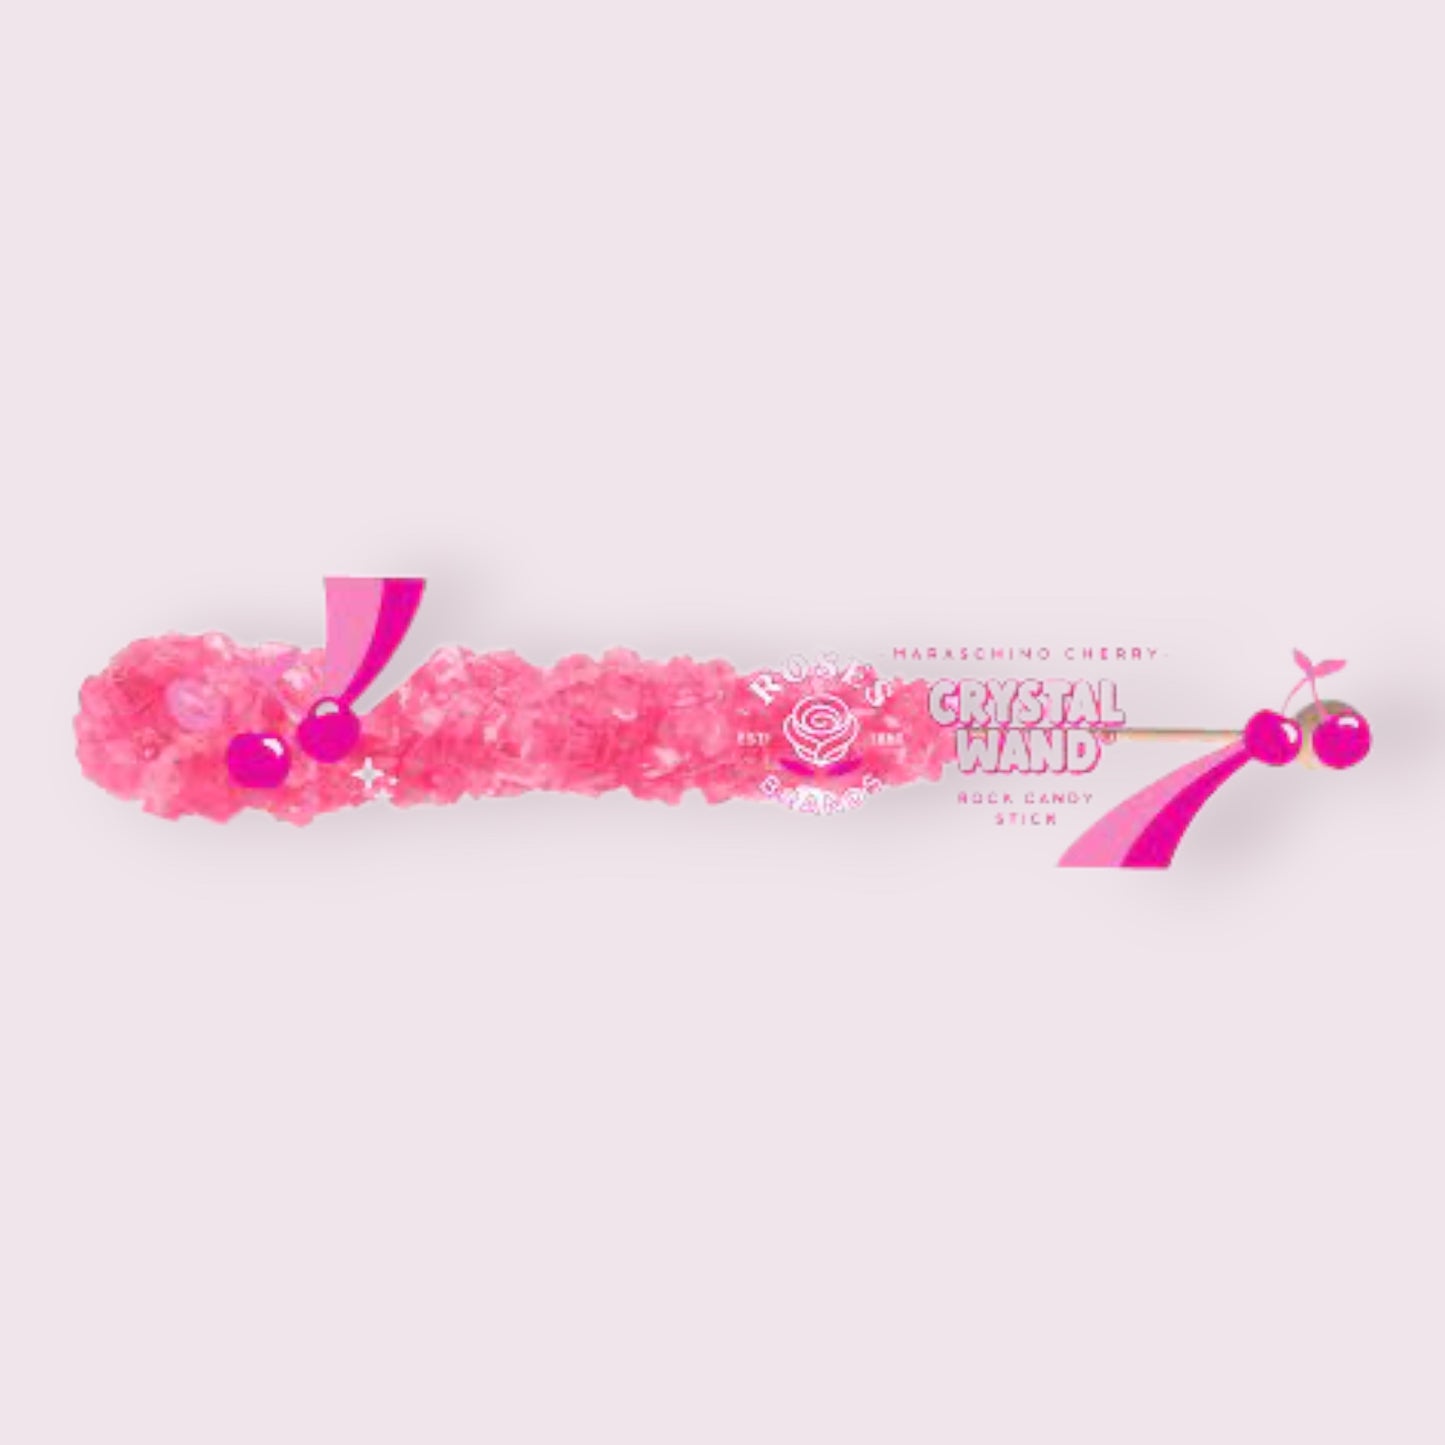 Roses Brands Crystal Wands Rock Candy  Pixie Candy Shoppe   